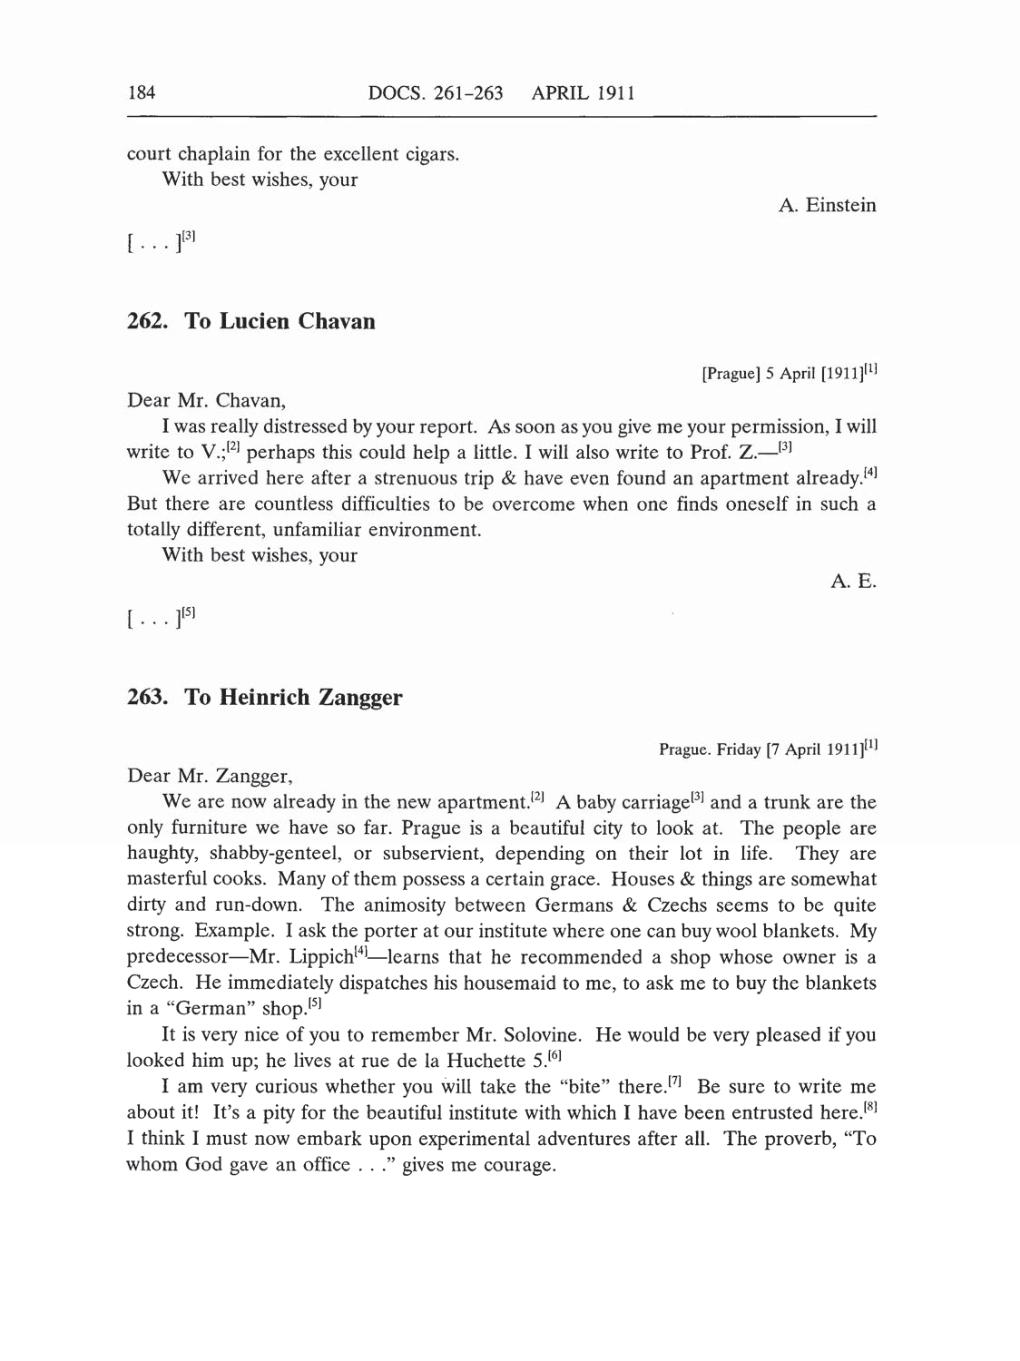 Volume 5: The Swiss Years: Correspondence, 1902-1914 (English translation supplement) page 184